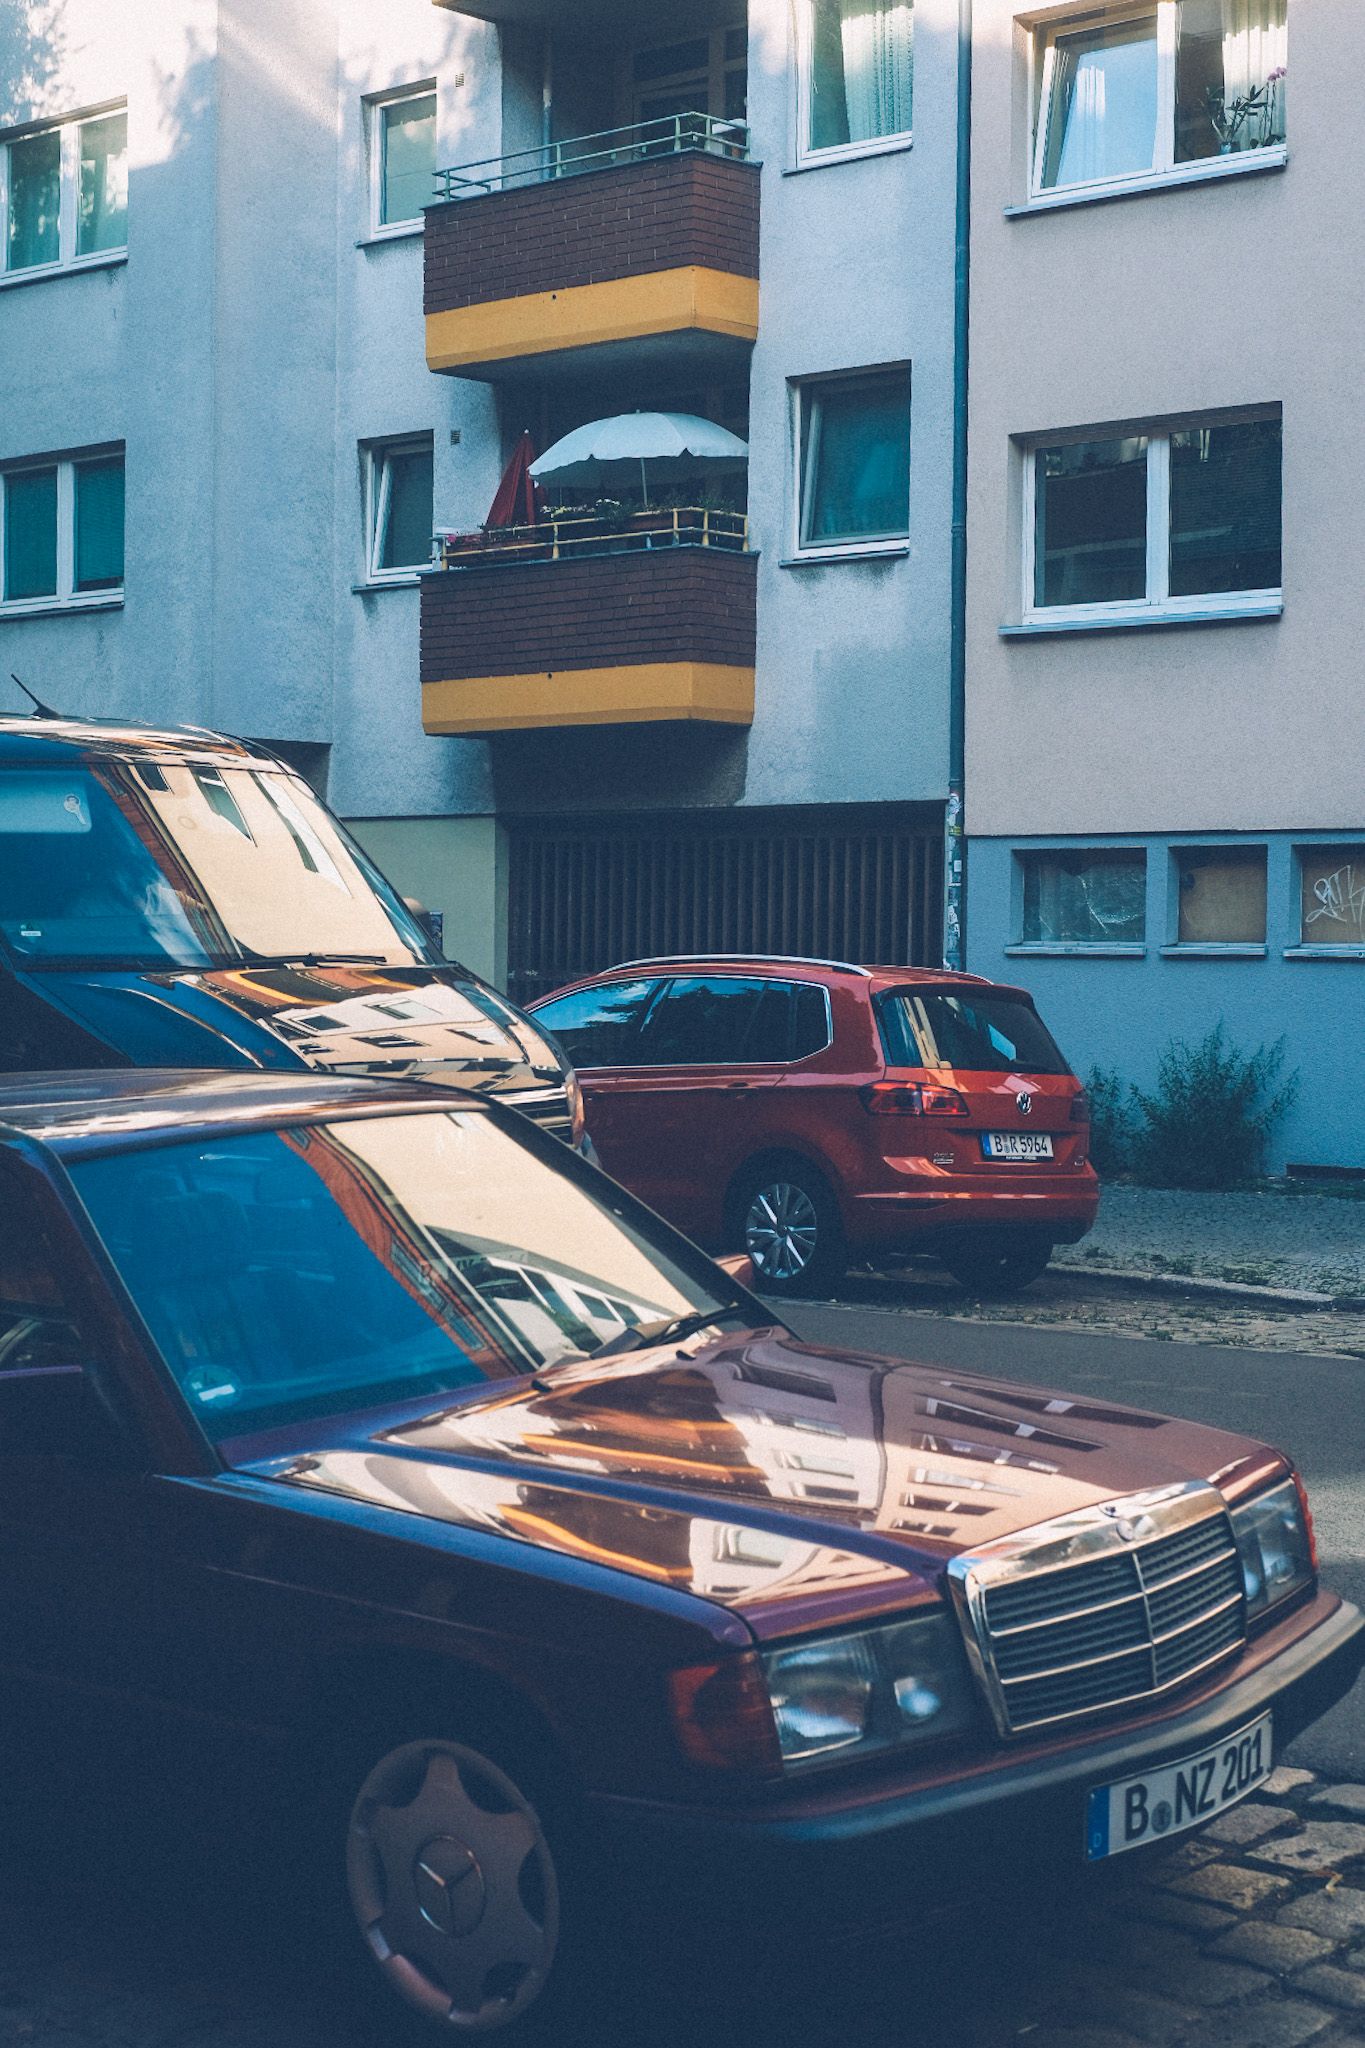 Three cars overlap, parked in a street in Berlin, in front of a white apartment building with balconies that are brown and yellow.